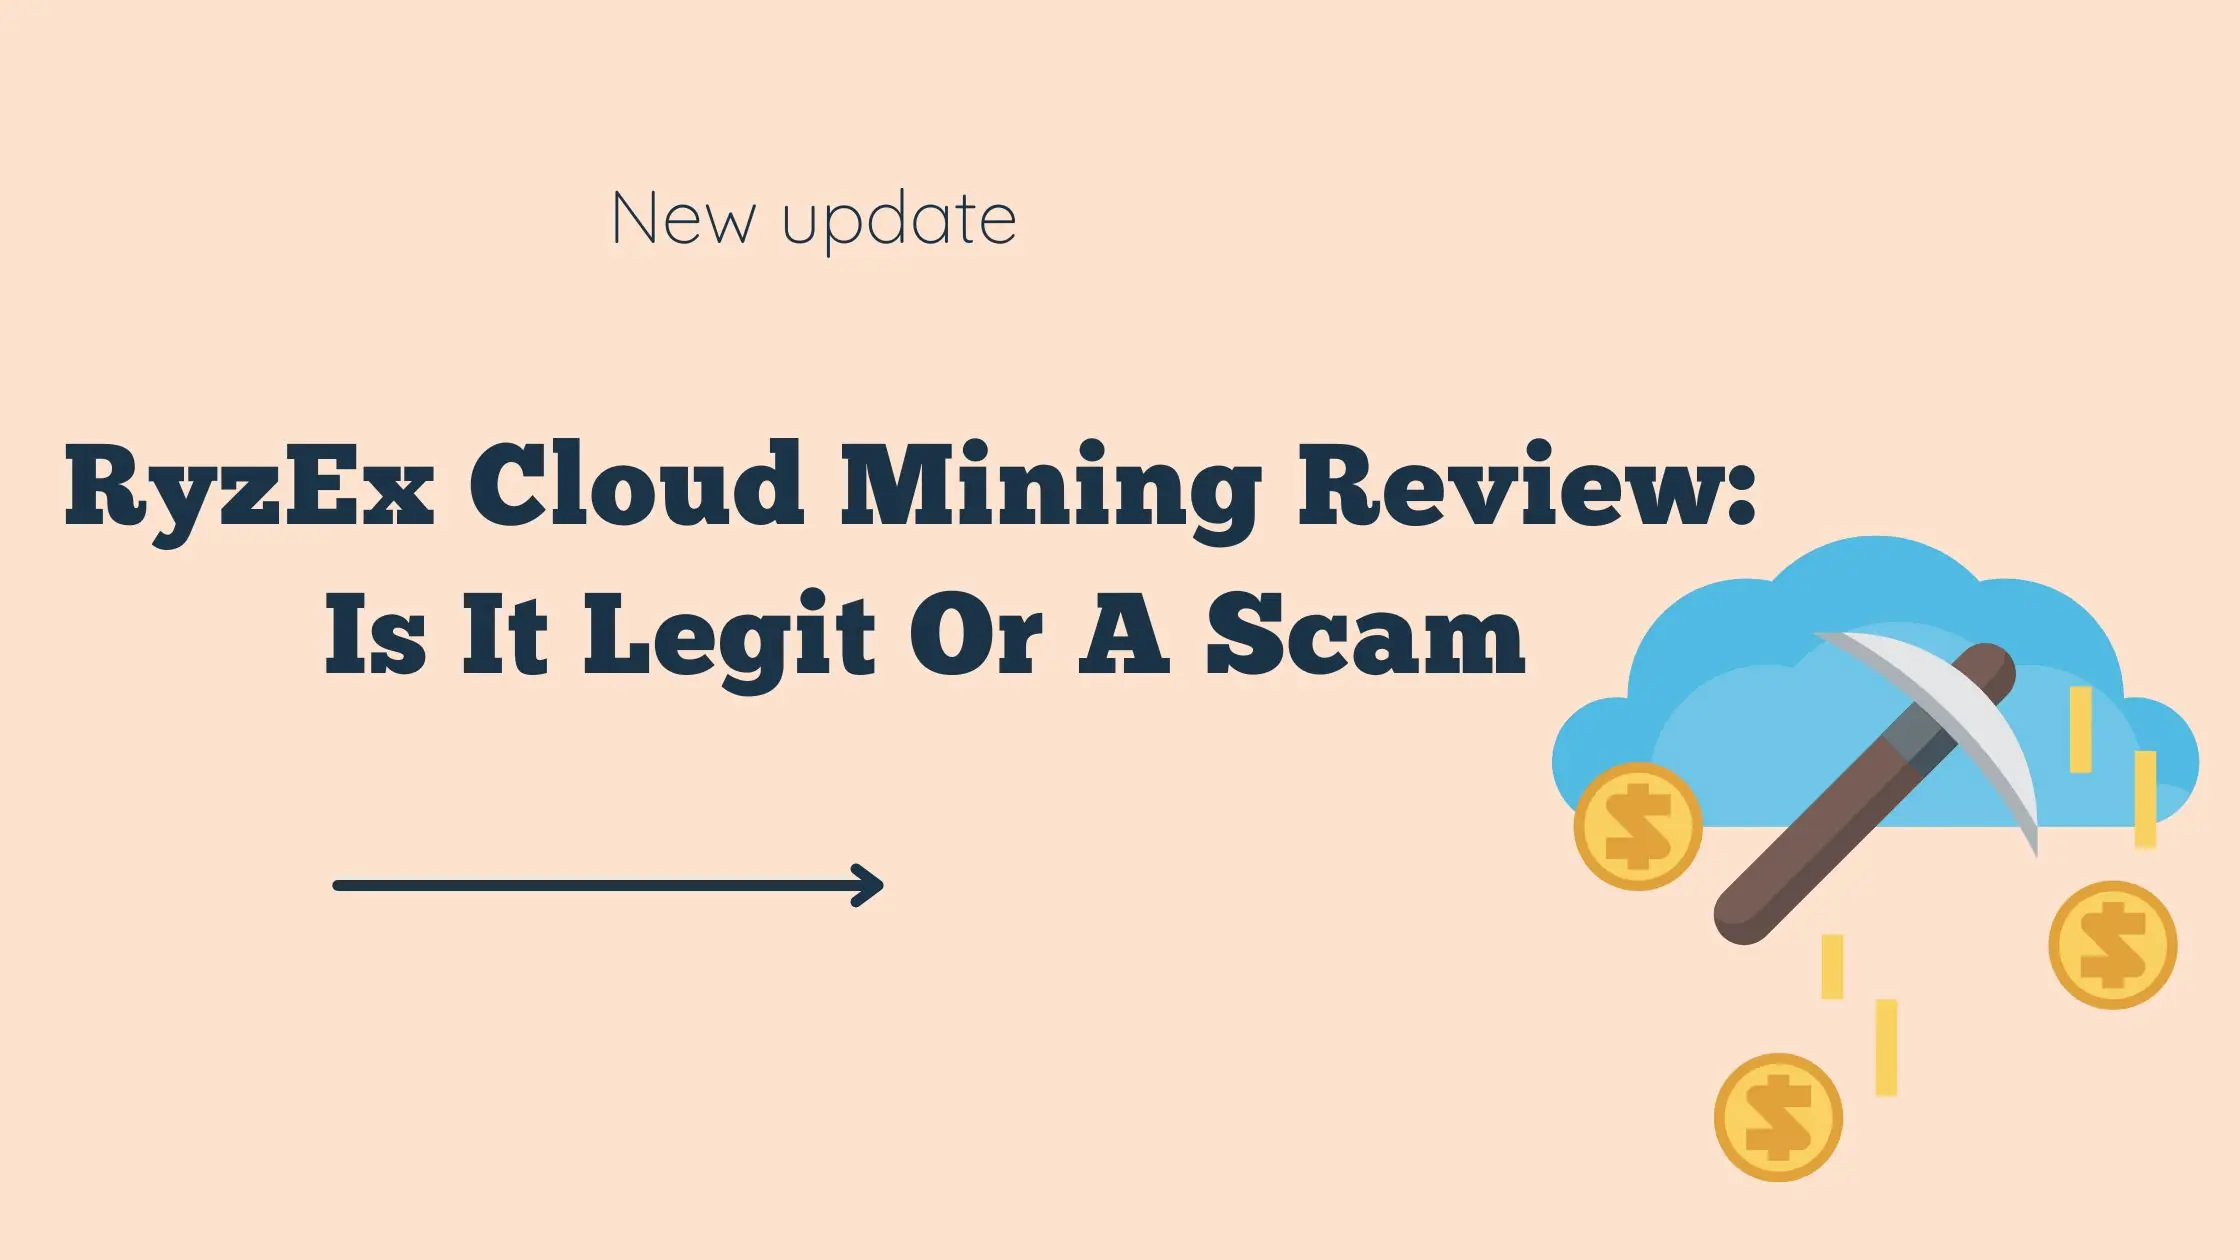 RyzEx Cloud Mining Review: Is It Legit Or A Scam